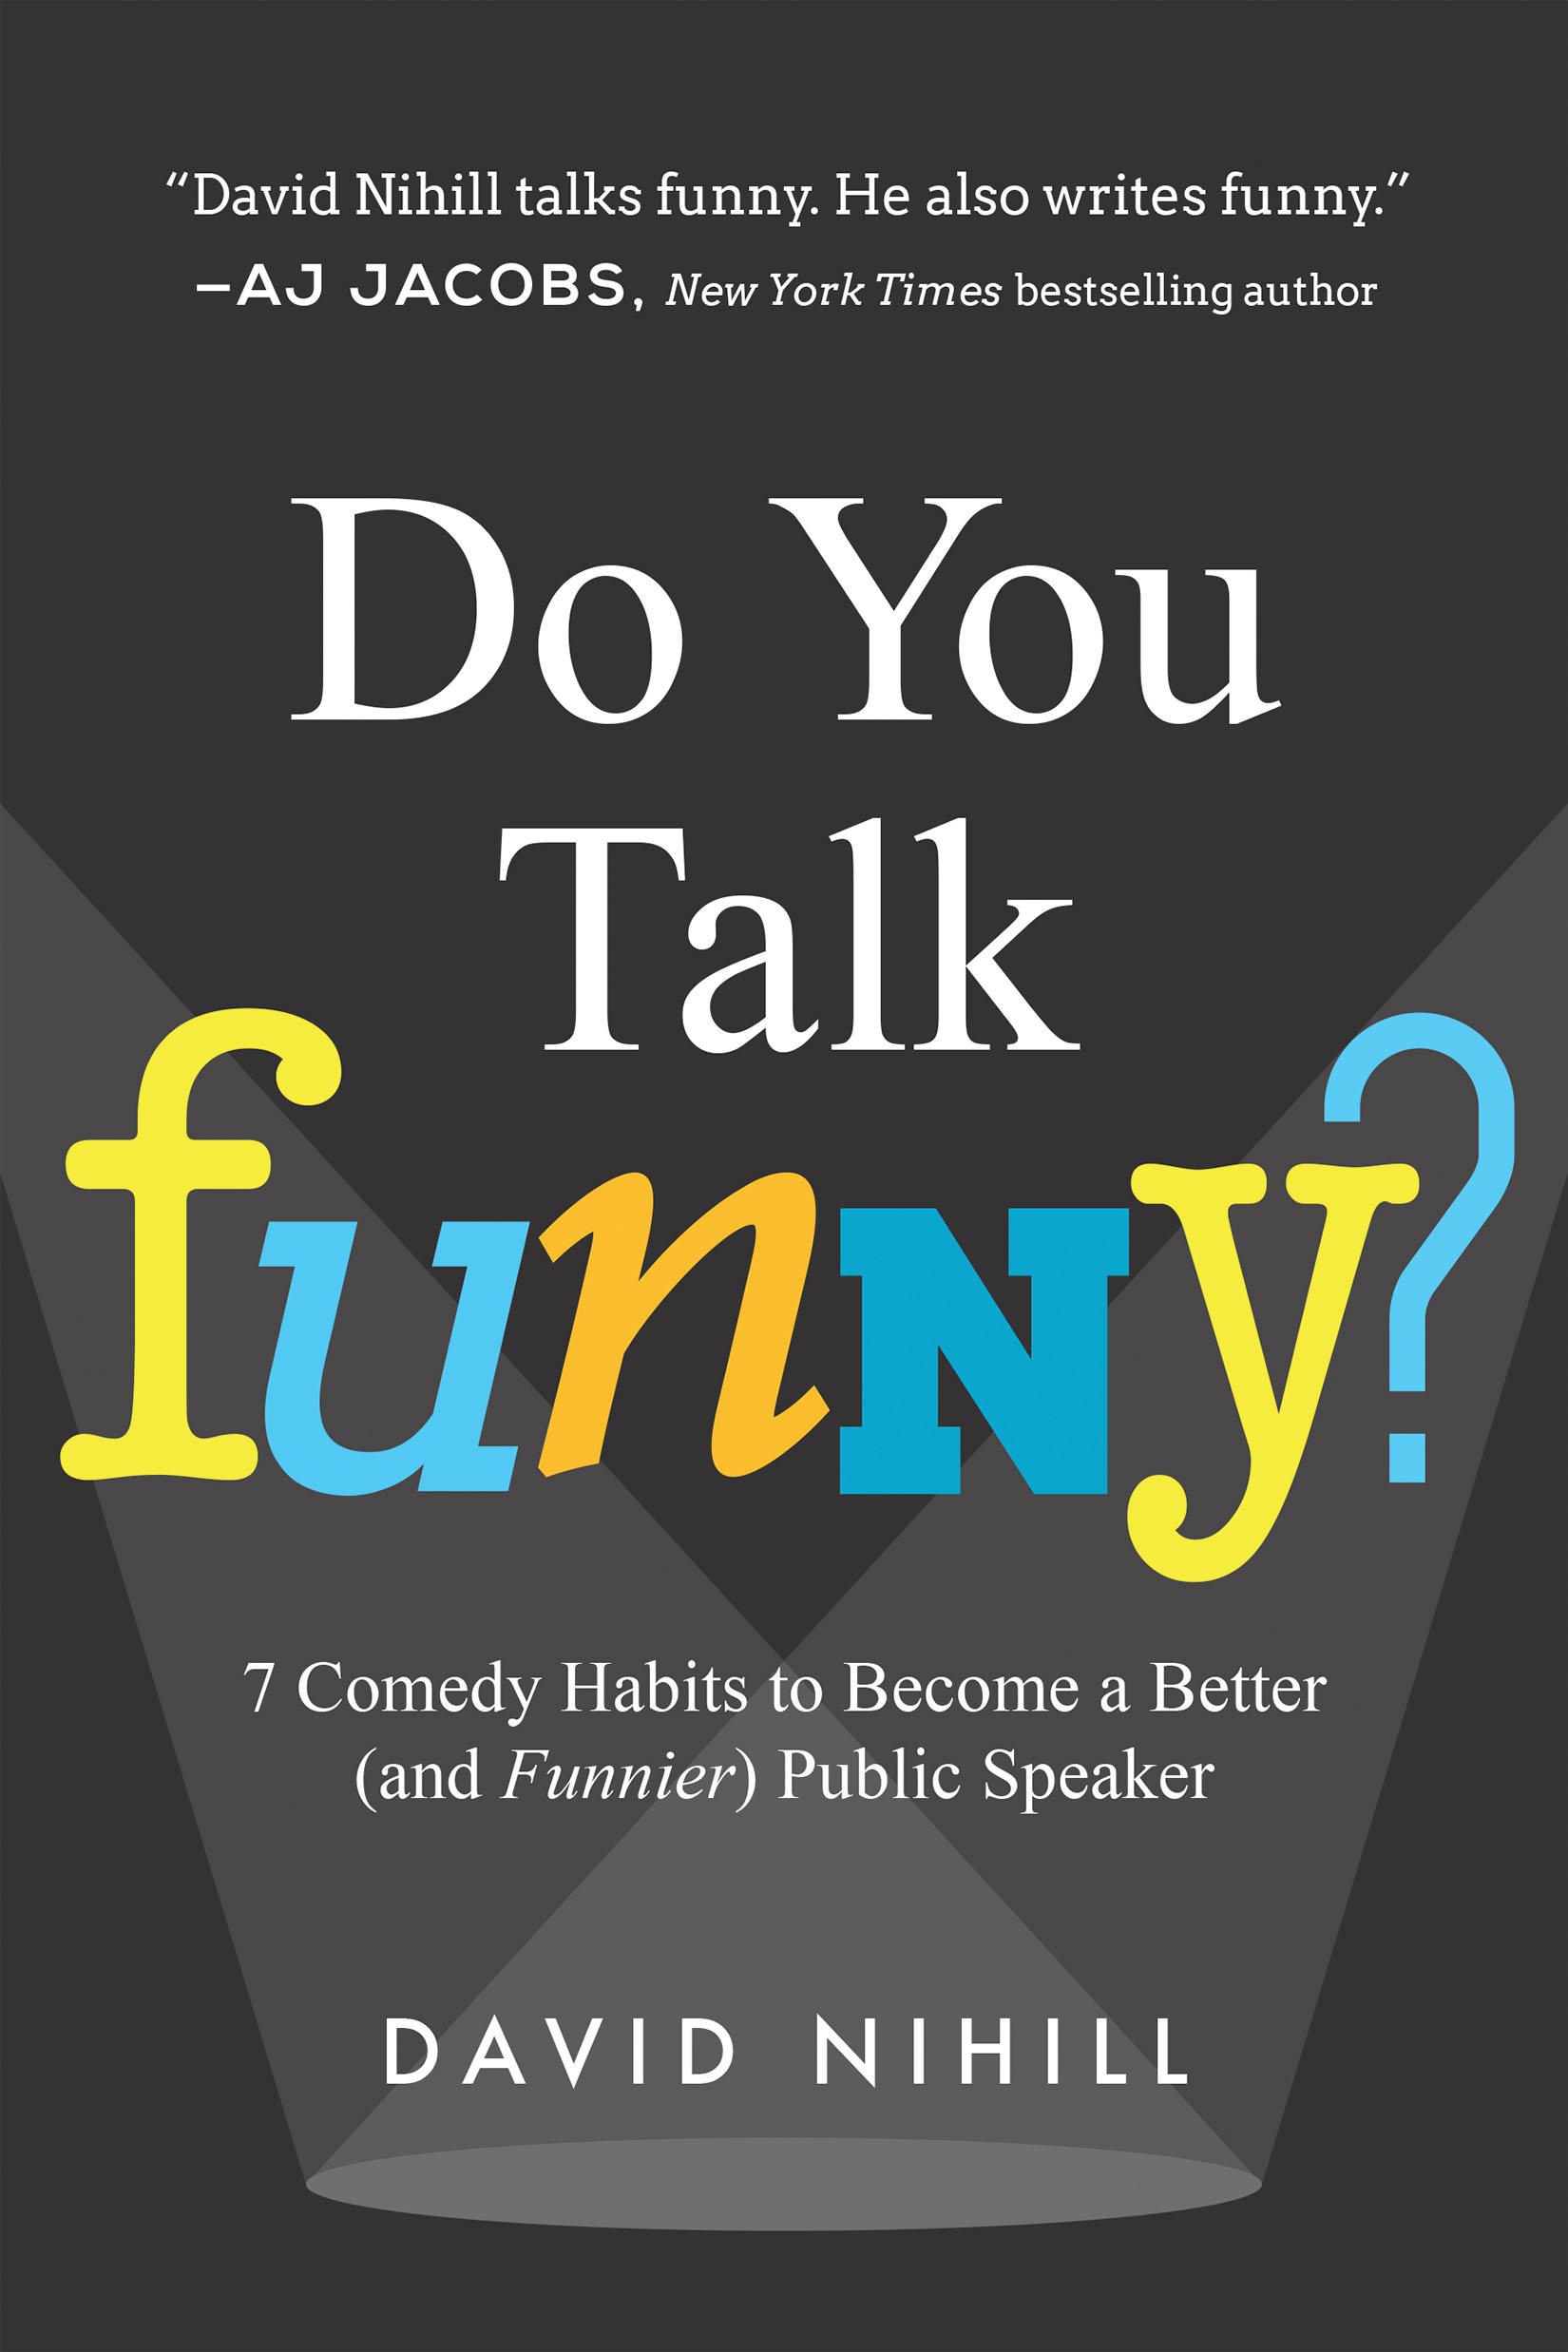 Do You Talk Funny? 7 Comedy Habits to Become a Better (and Funnier) Public Speaker